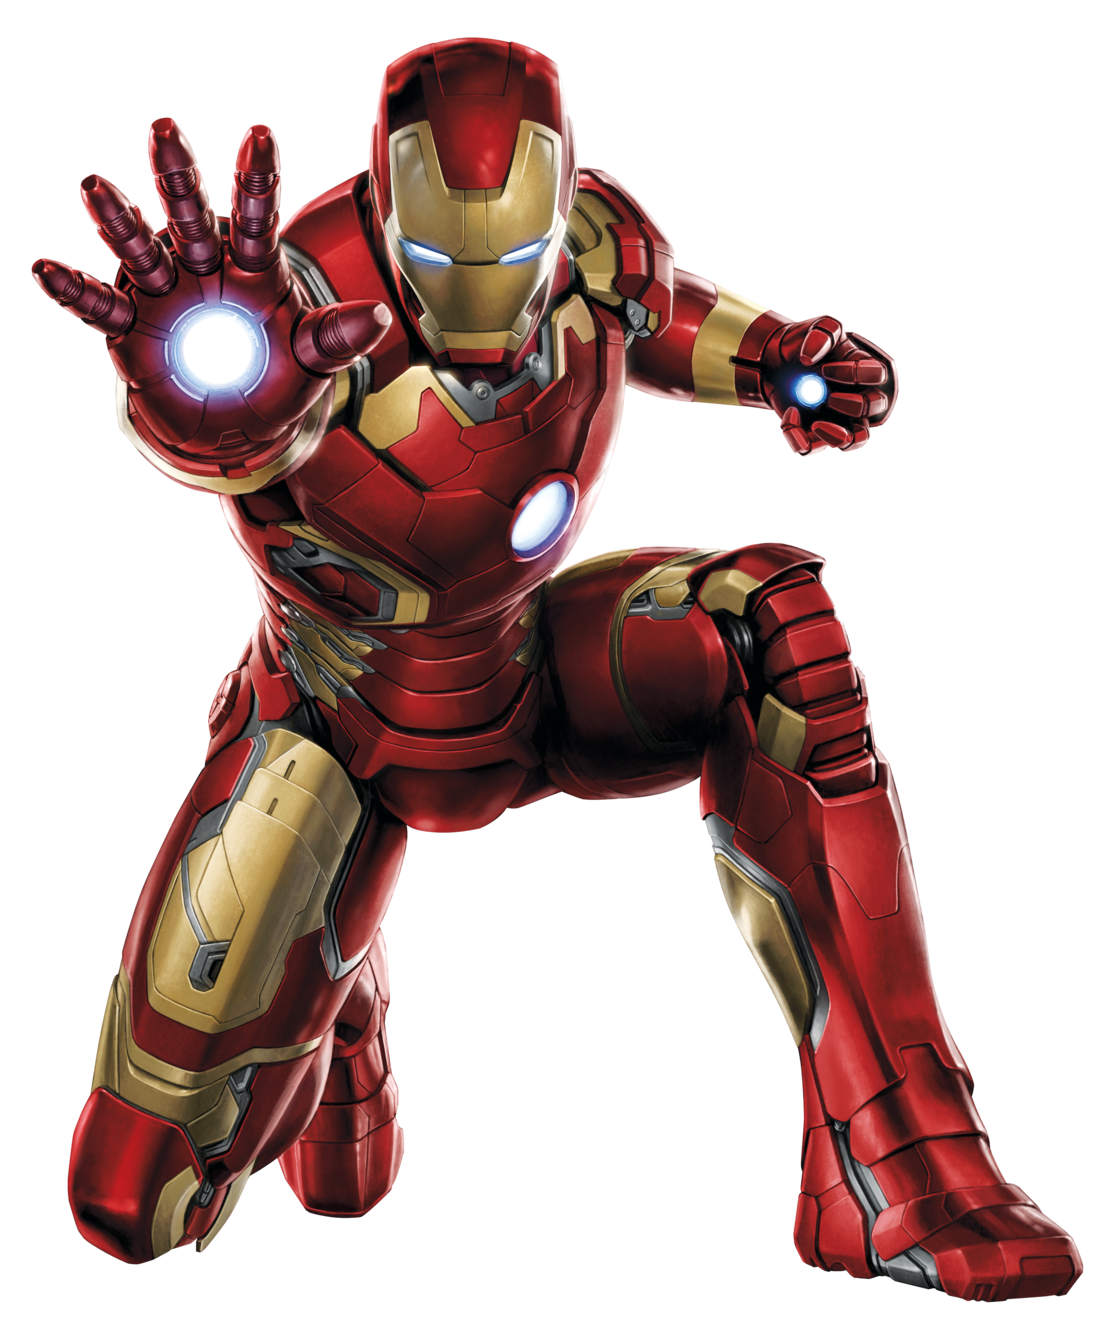 Iron Man Picture PNG Image, Ironman HD PNG - Free PNG